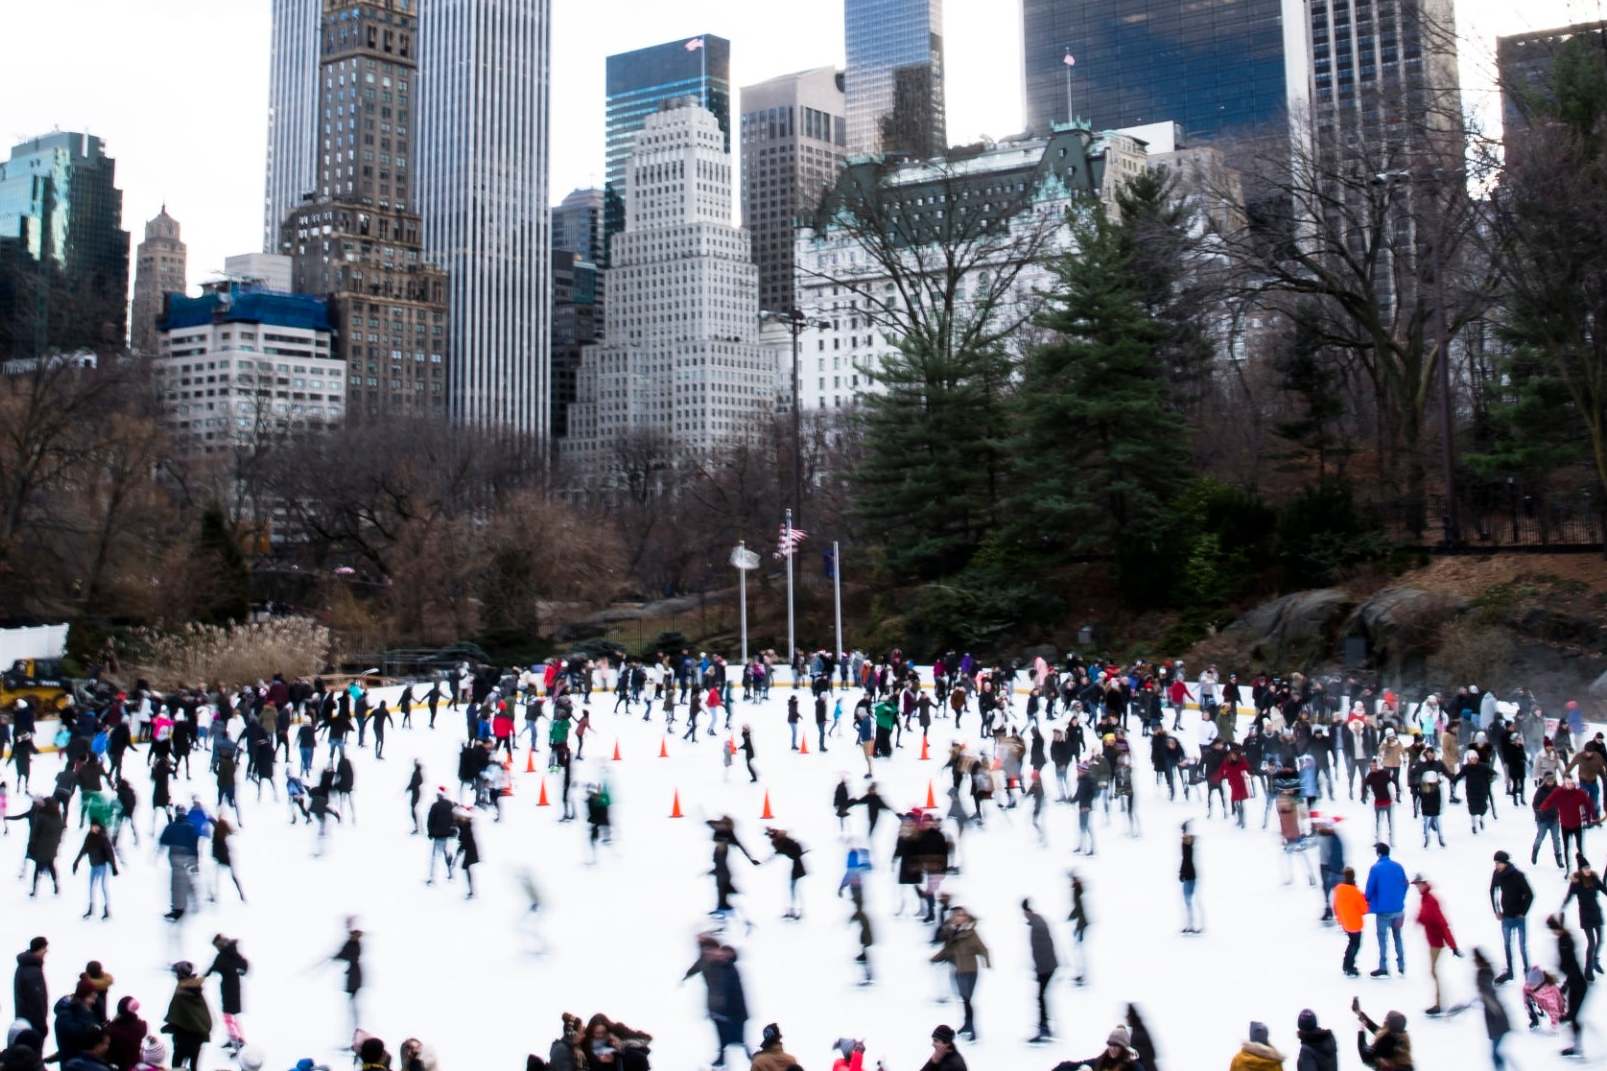 Why the Central Park ice rink is playing down its Trump associations ...